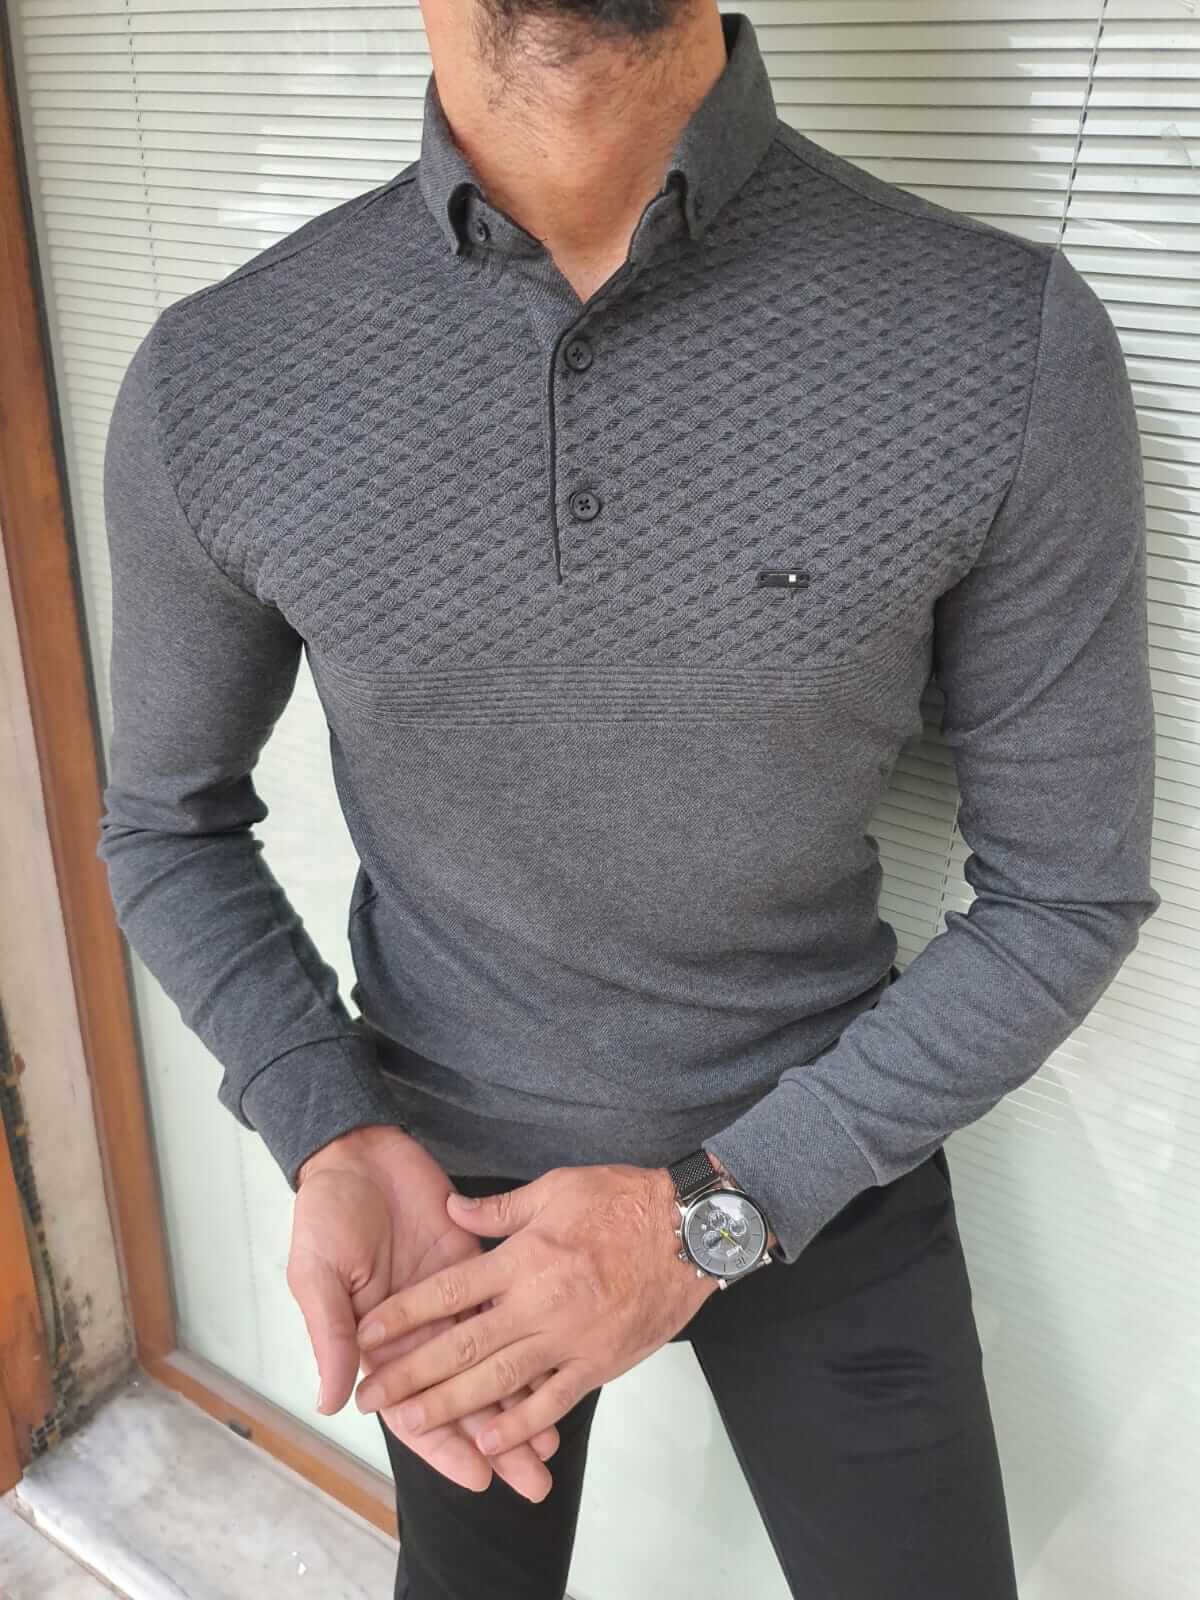 A  long-sleeved gray combed knitwear. The knit fabric has a soft and textured appearance